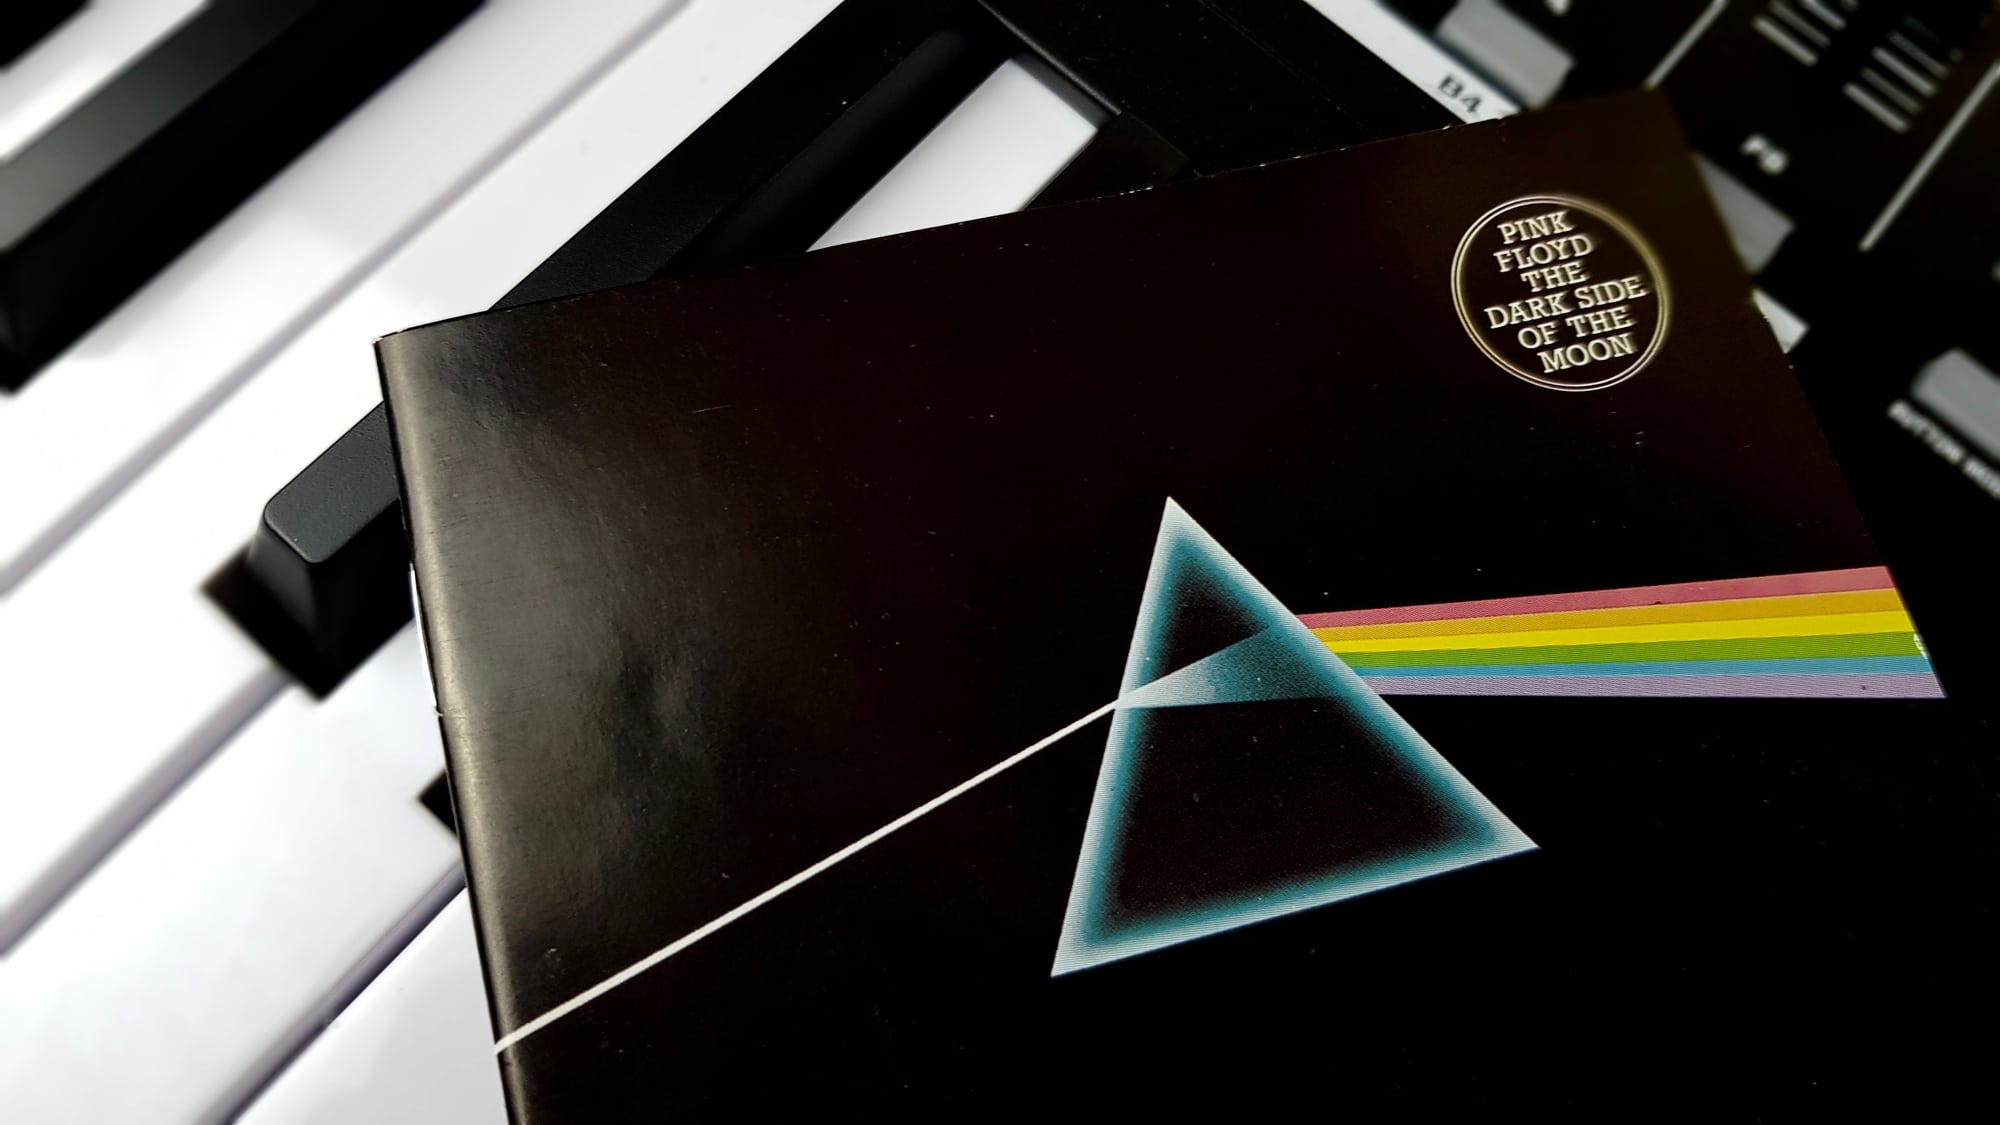 stock-photo-of-Pink-Floyd-Dark-Side-of-the-Moon-album-cover